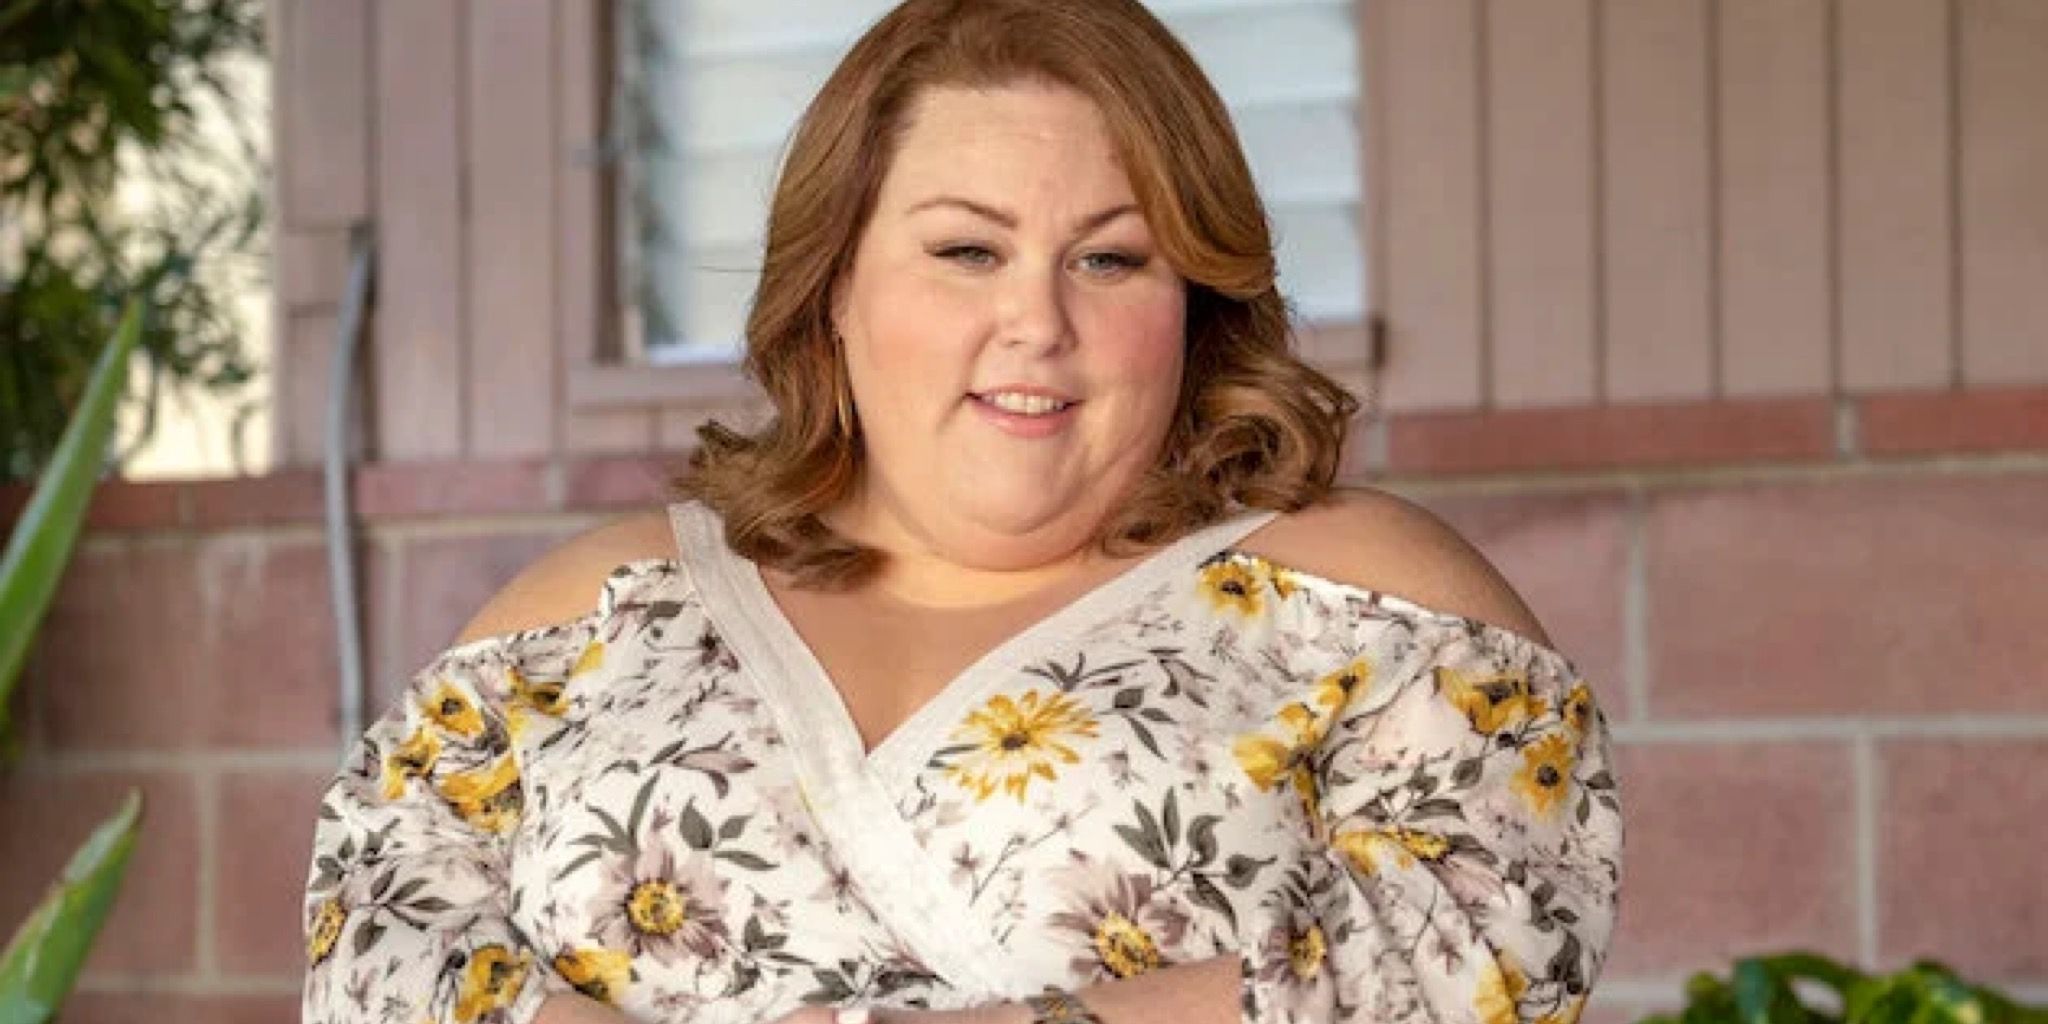 Chrissy Metz as Kate Pearson on This Is Us.